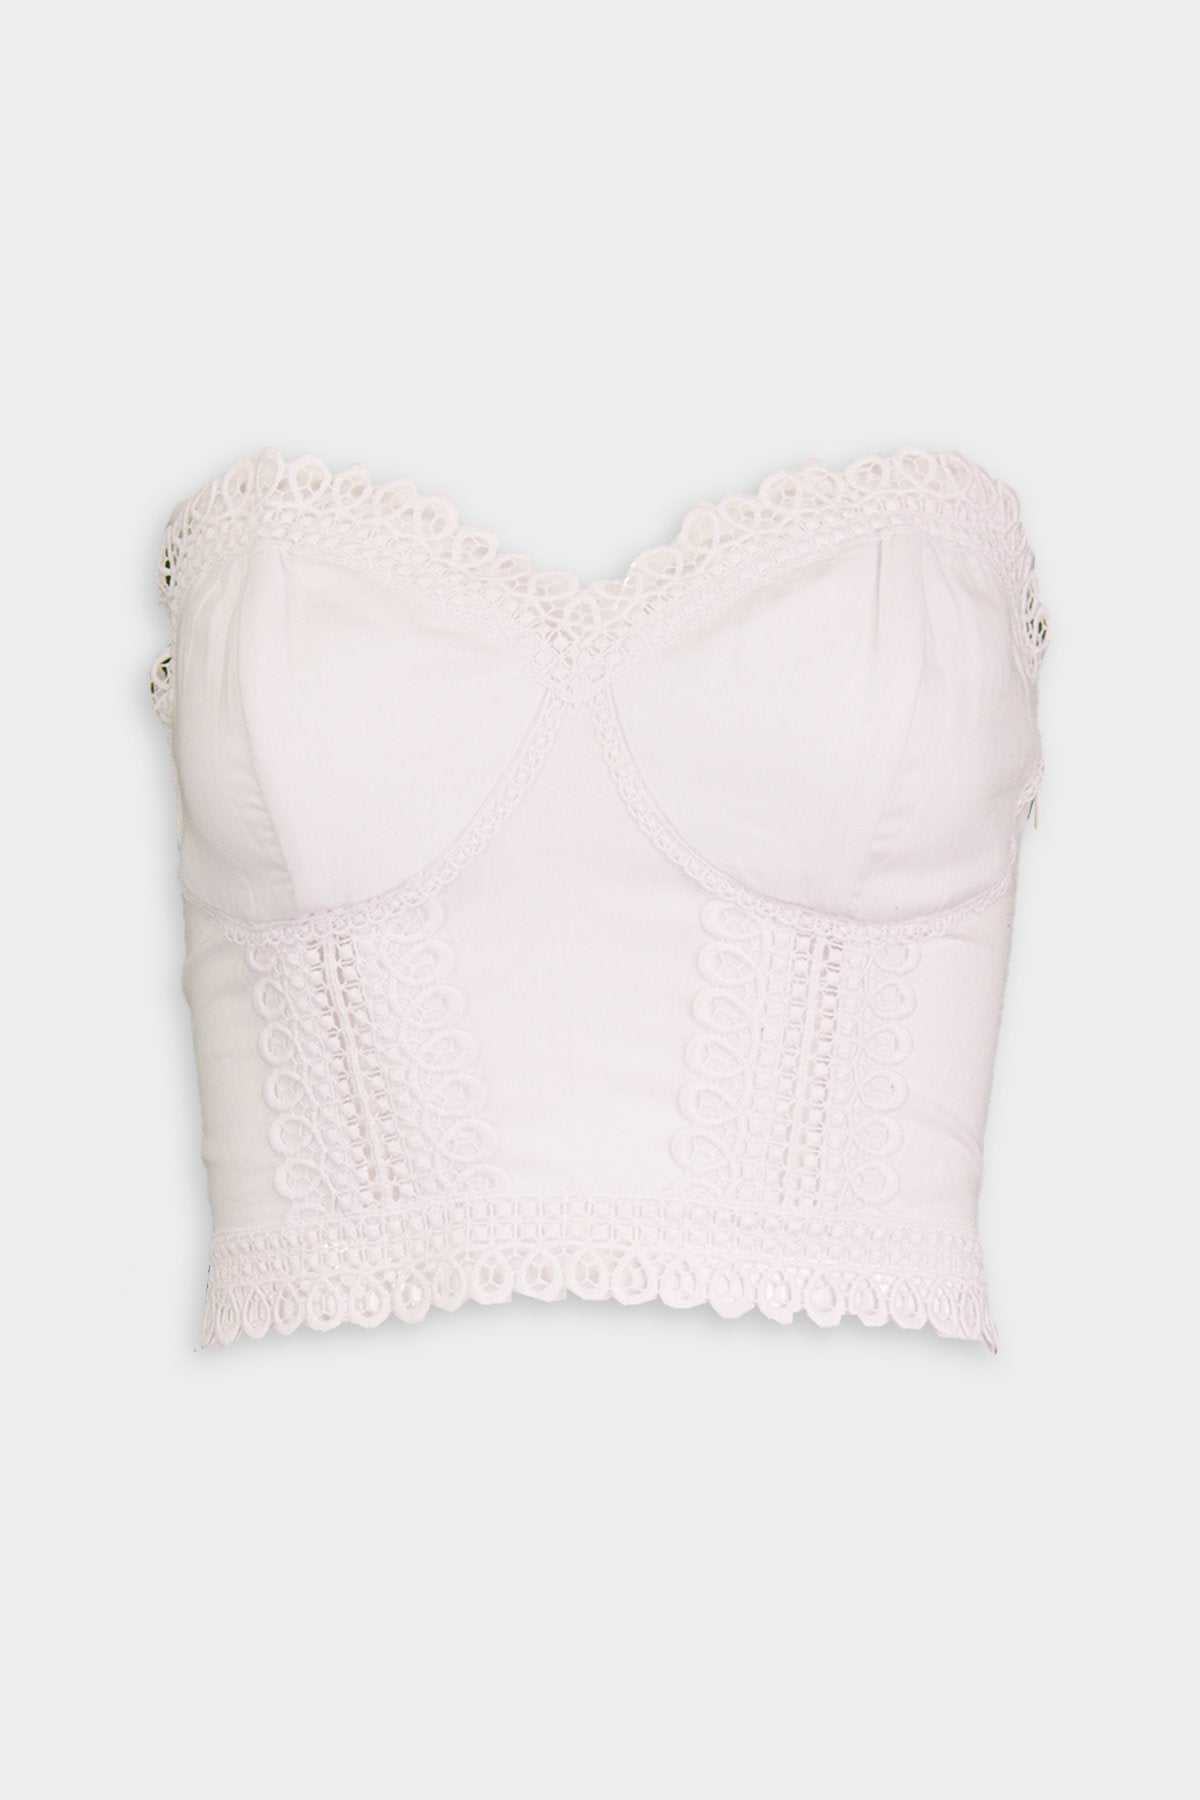 Lys Bustier in White - shop-olivia.com